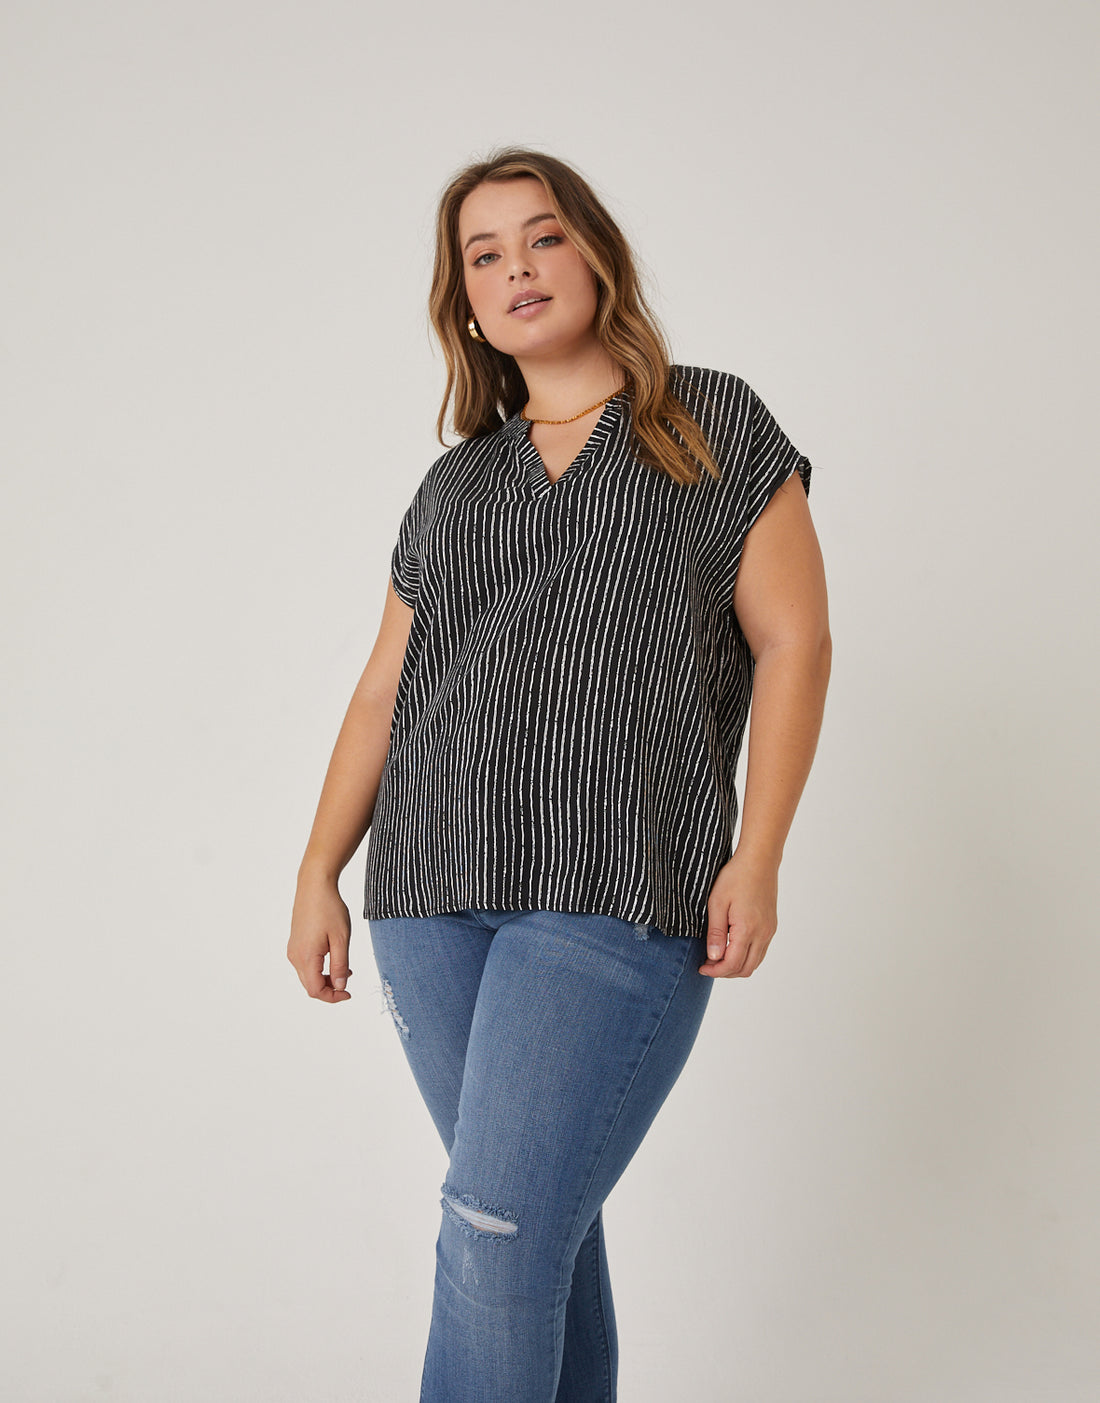 Curve Sketched Lines Printed Top Plus Size Tops Black 1XL -2020AVE